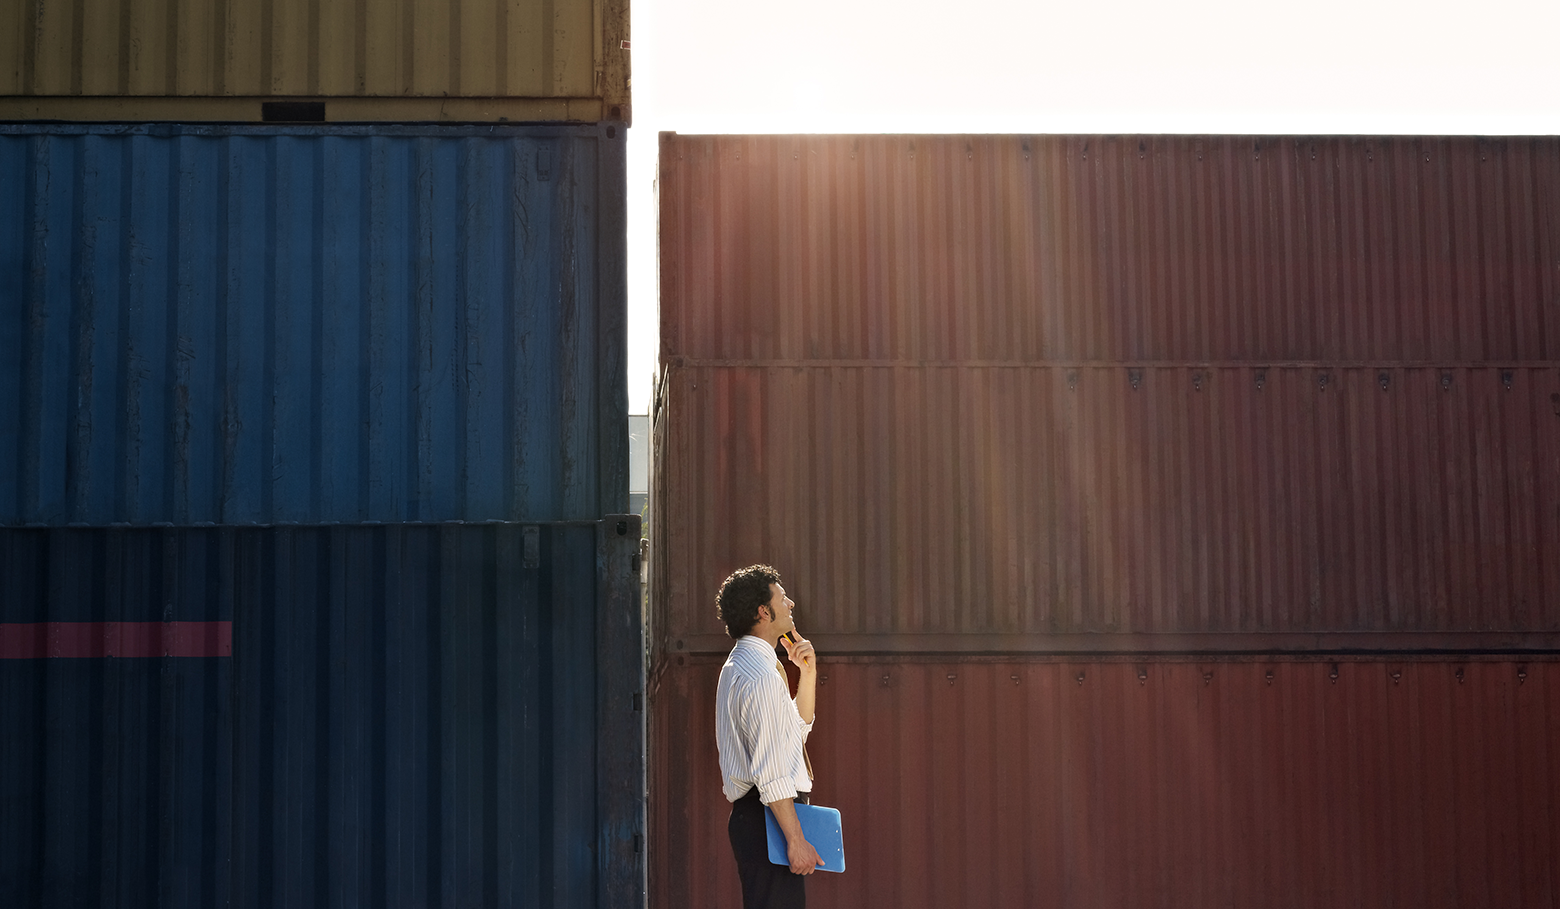 Your Guide to LCL (Less-than-Container Load) - The Pros and Cons